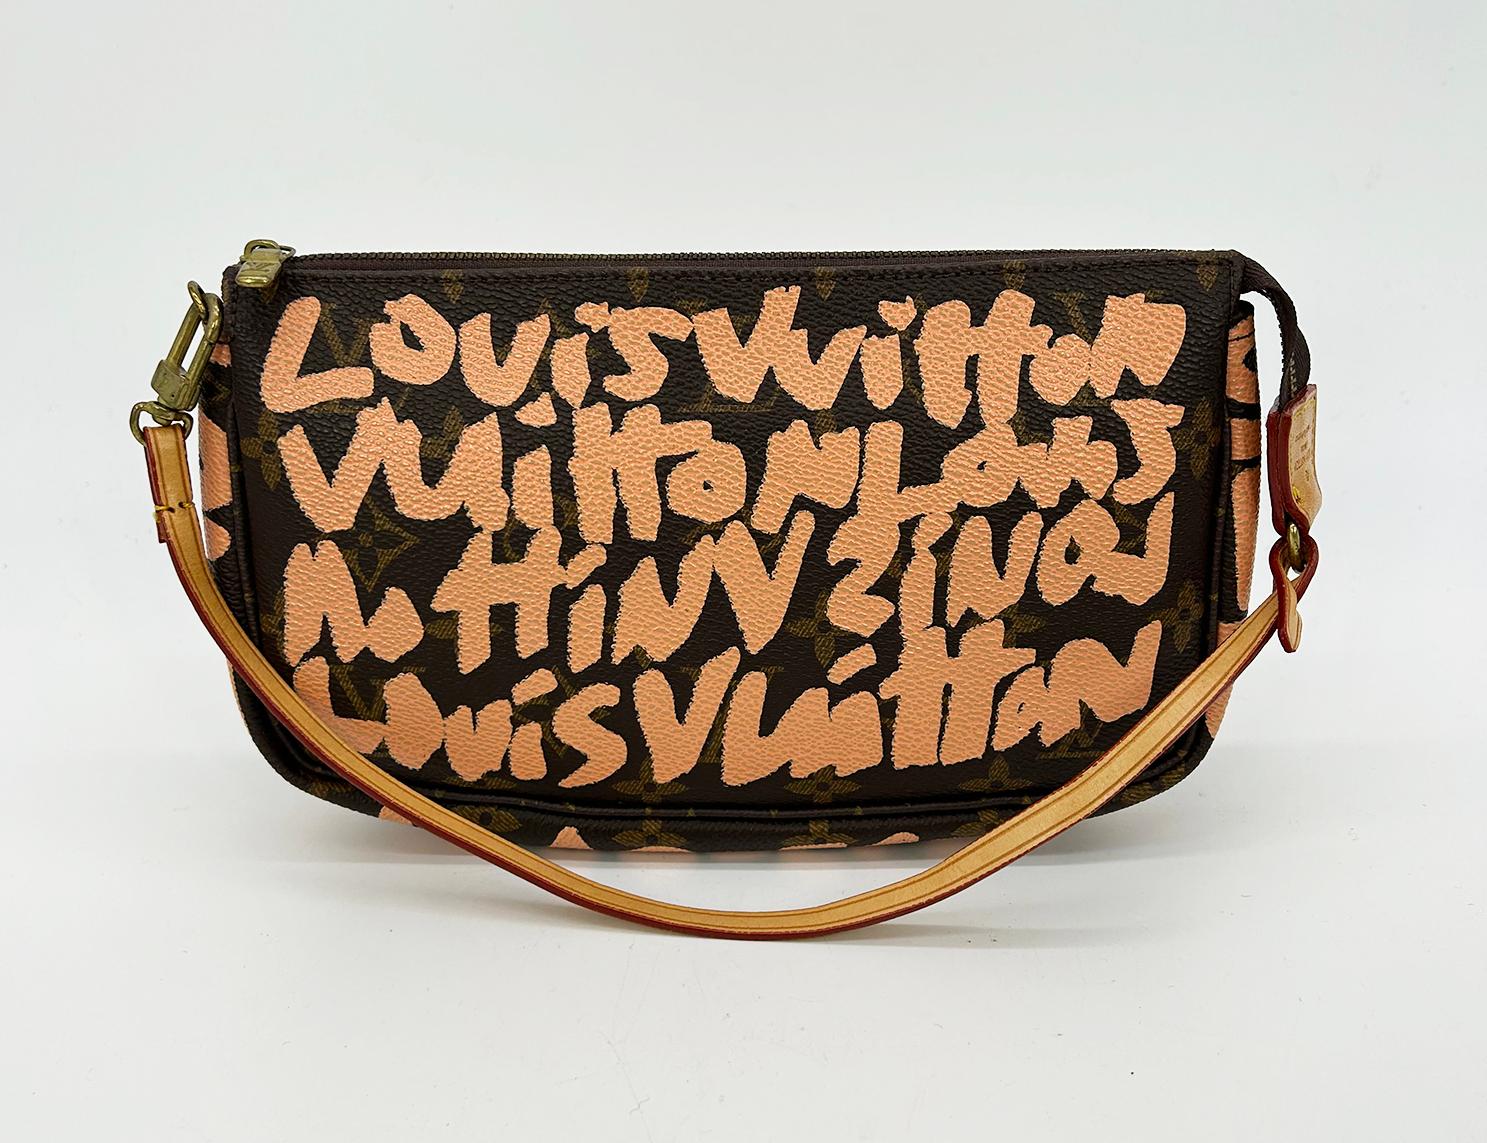 Louis Vuitton Monogram Graffiti Pochette Acessories in very good condition. Signature  Louis Vuitton monogram canvas exterior in brown and gold print with limited edition peach orange graffiti print throughout. Tan leather and golden brass hardware